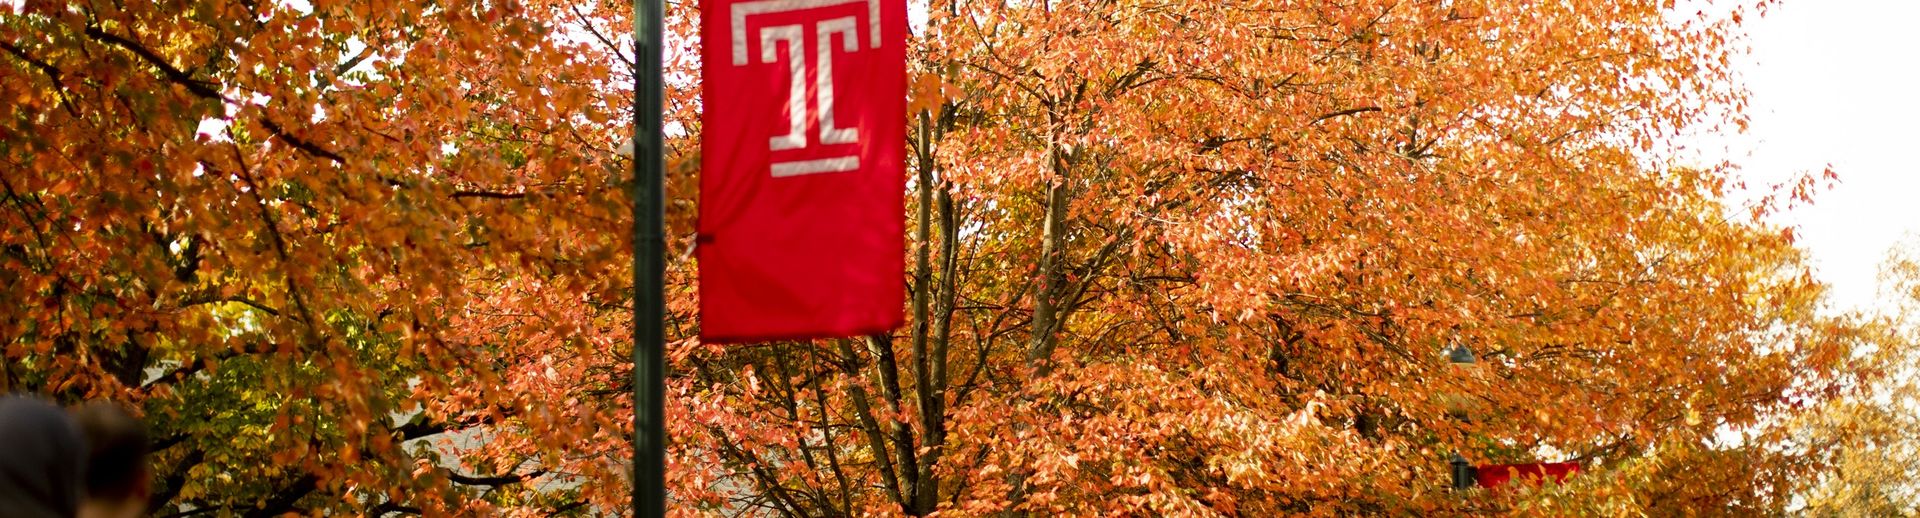 Students walking under a Temple T flag and trees with colorful autumn leaves